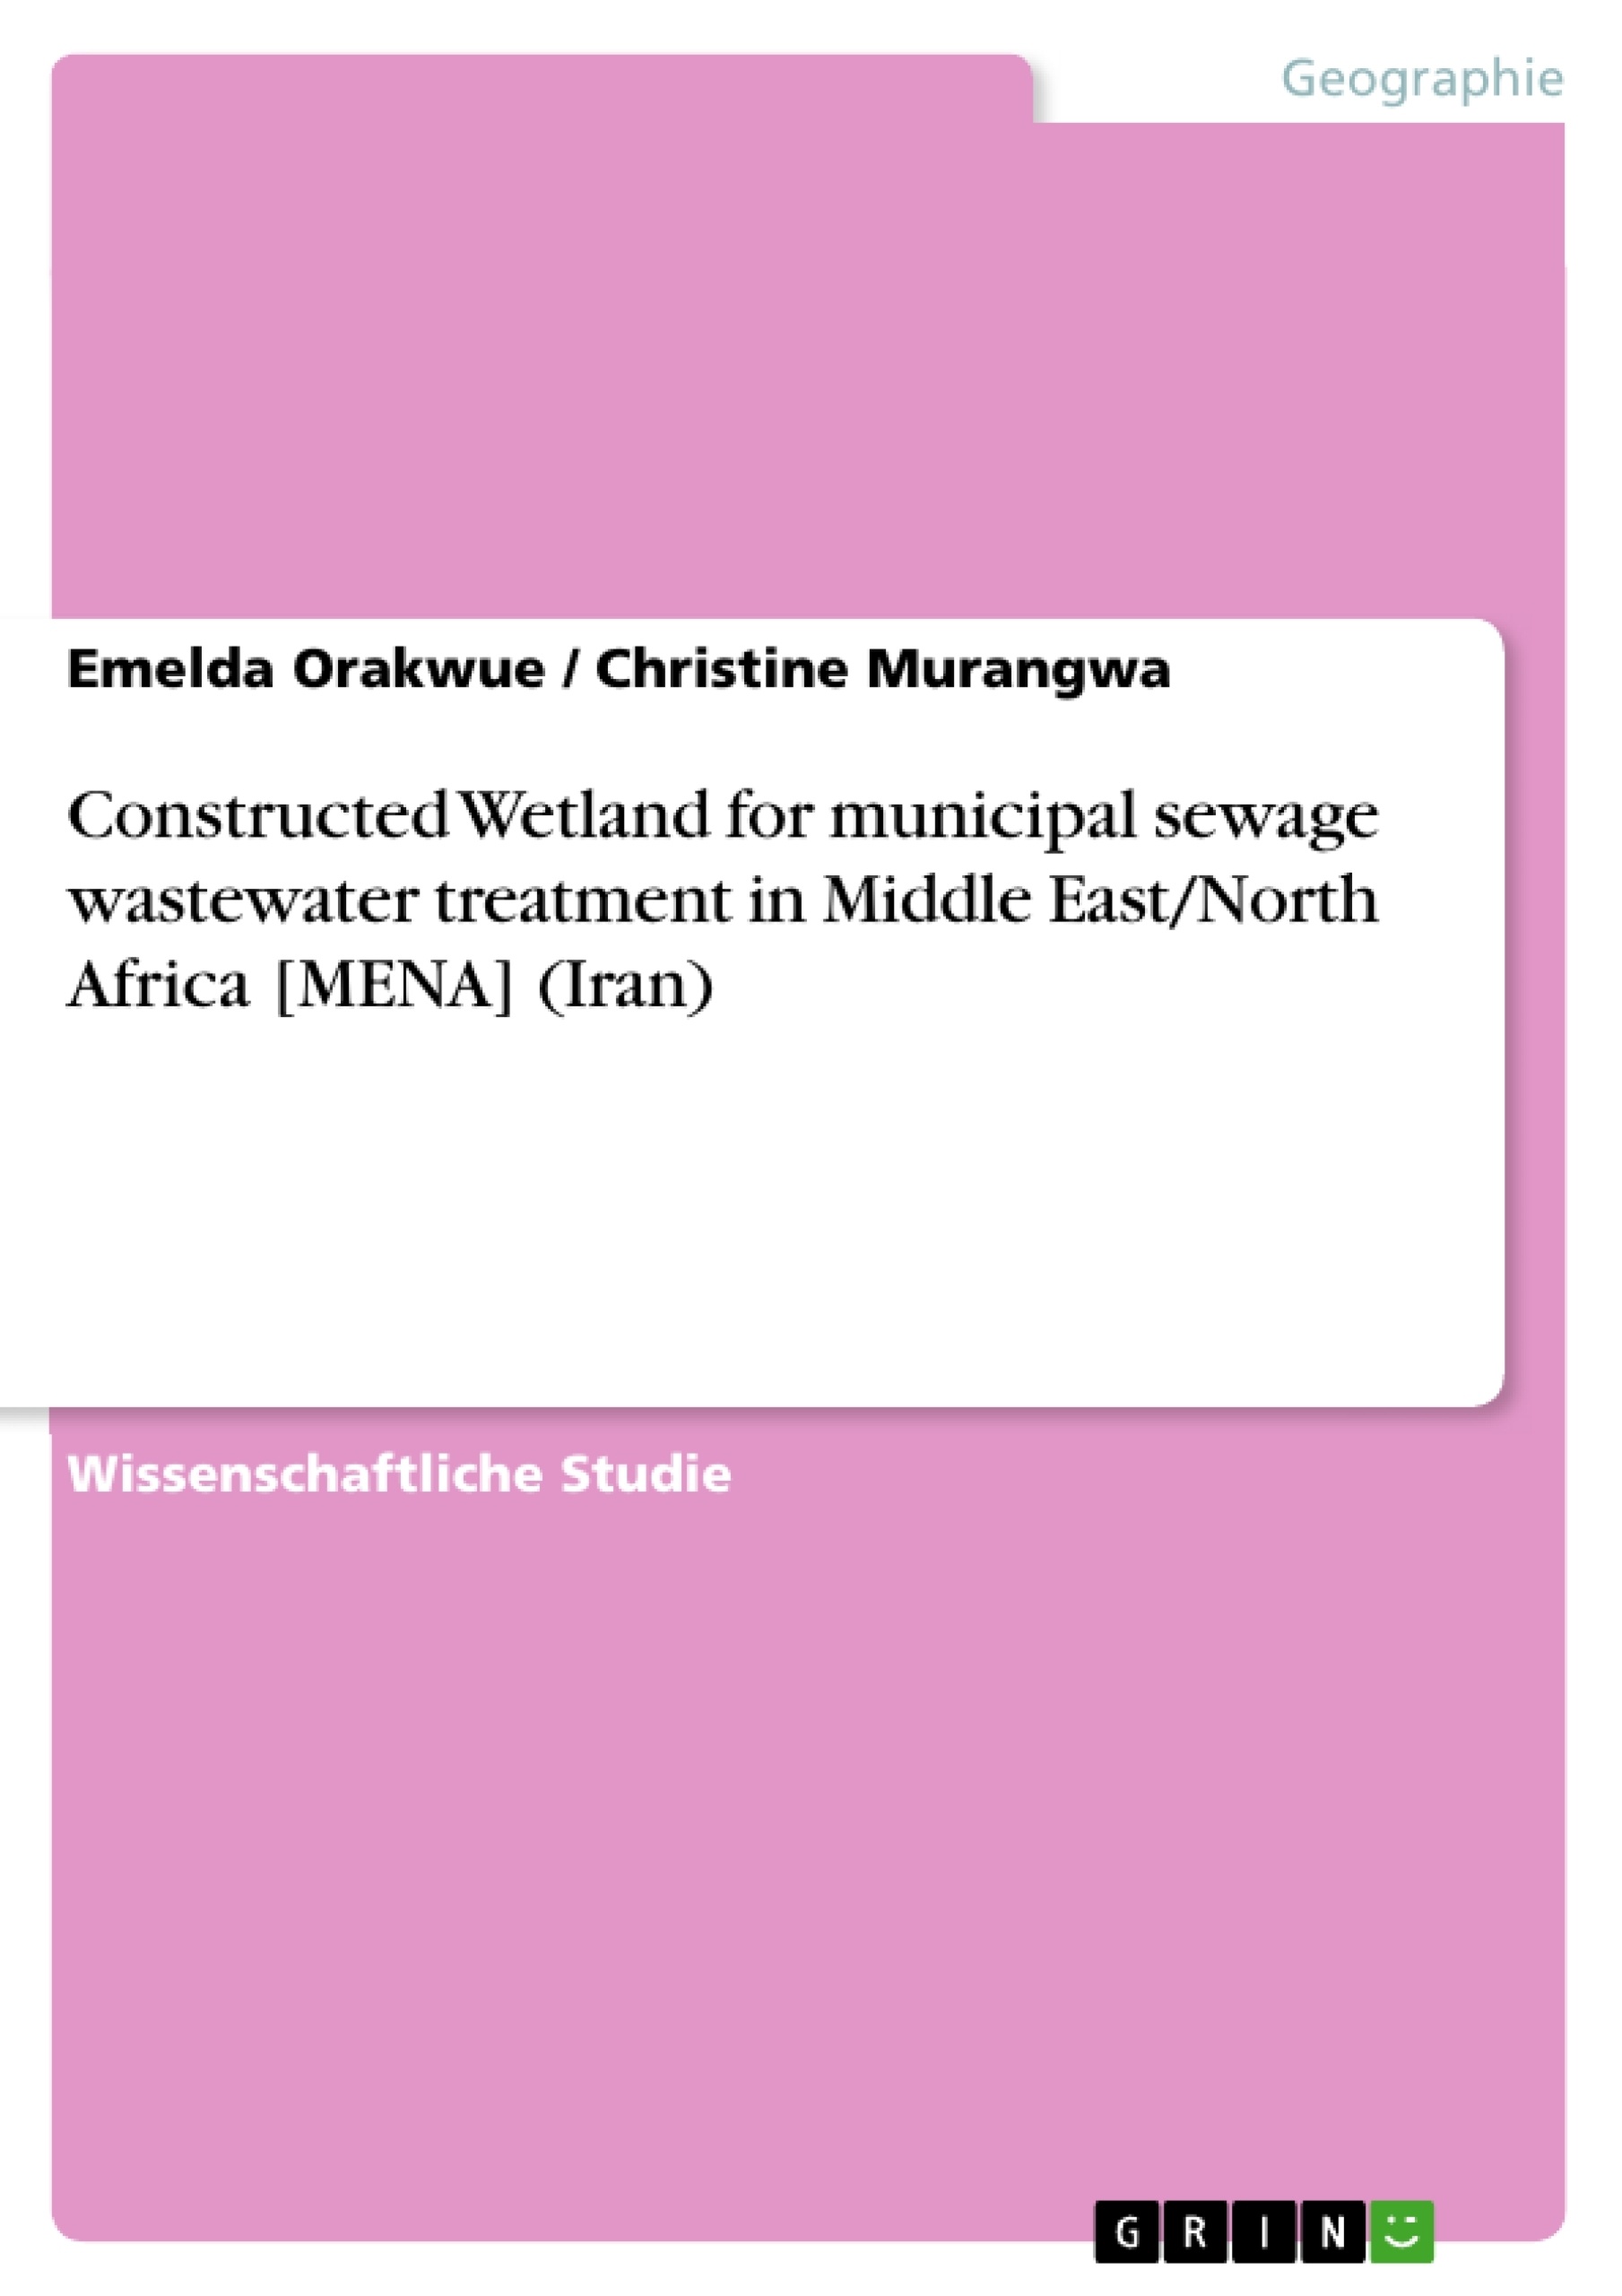 Título: Constructed Wetland for municipal sewage wastewater treatment in Middle East/North Africa [MENA] (Iran)